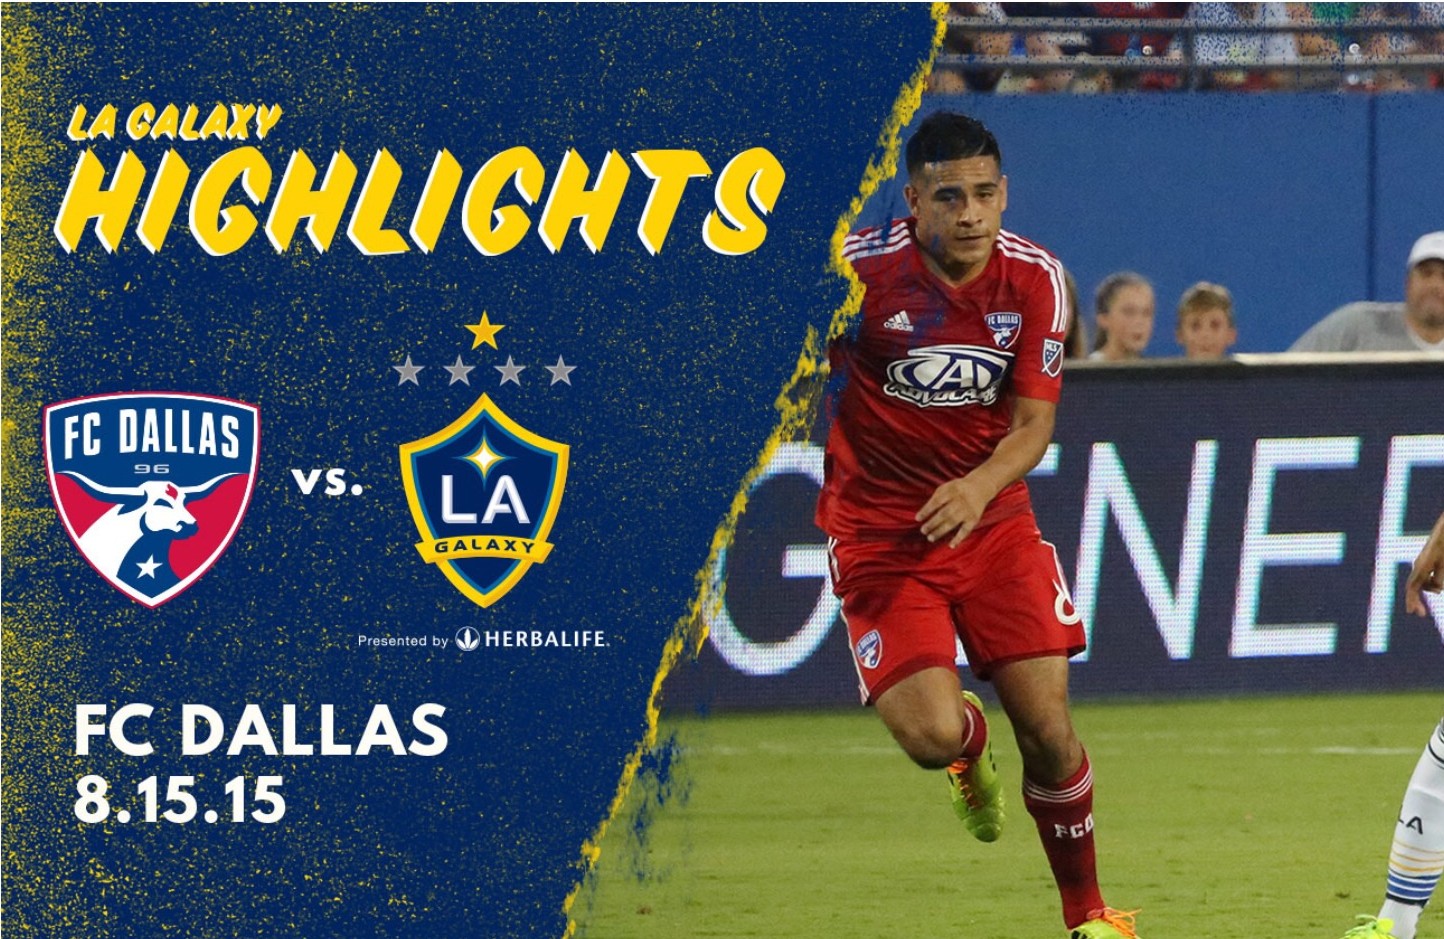 Galaxy Come from behind in victory over FC Dallas